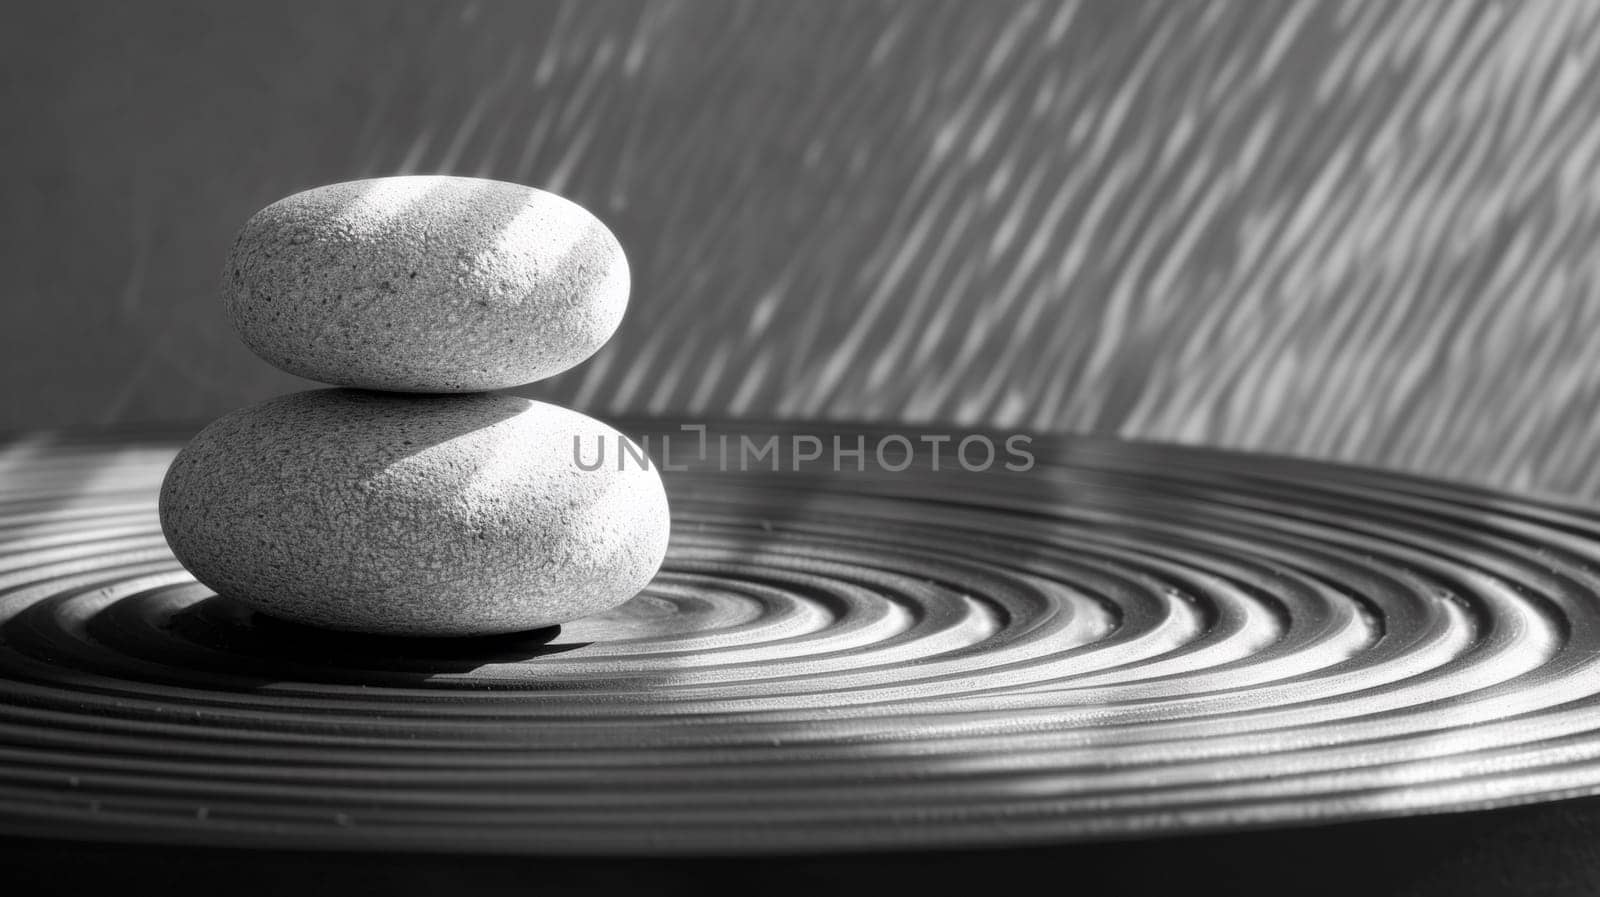 A black and white photo of two rocks sitting on top of a circular table, AI by starush